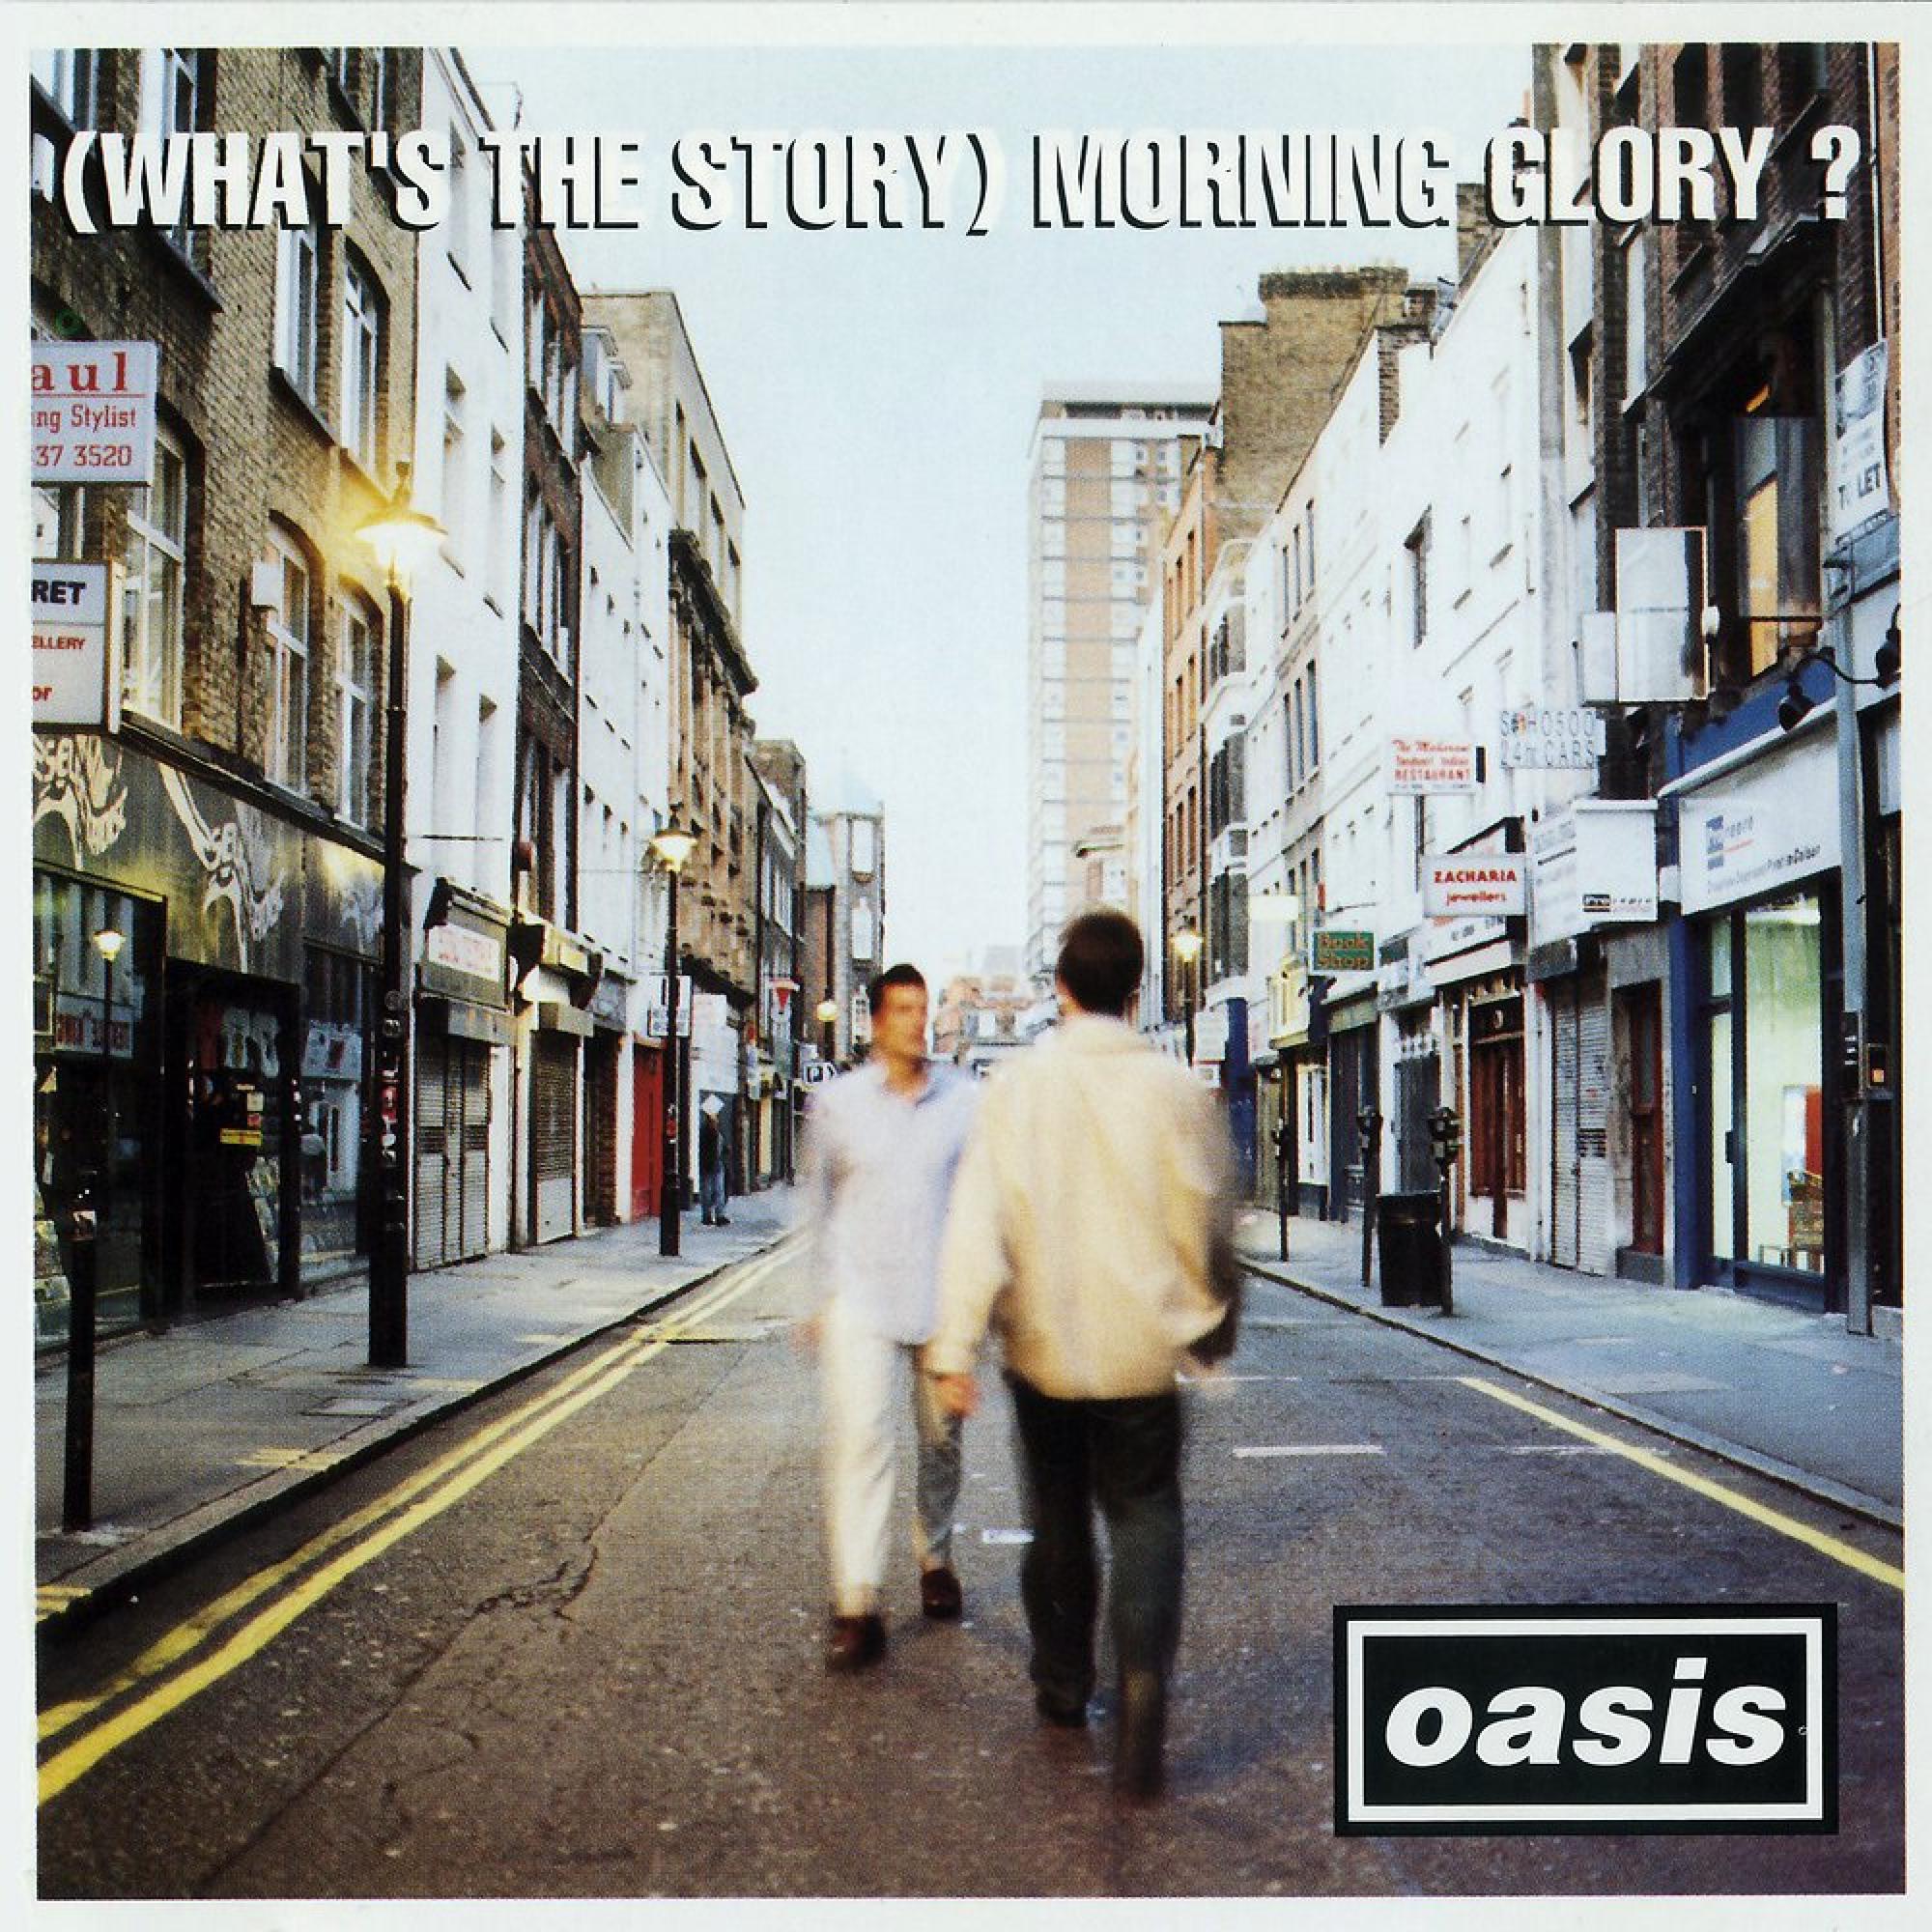 OASIS - (What’s The Story) Morning Glory? (25th Anniversary ) - 2LP - Limited Silver Vinyl